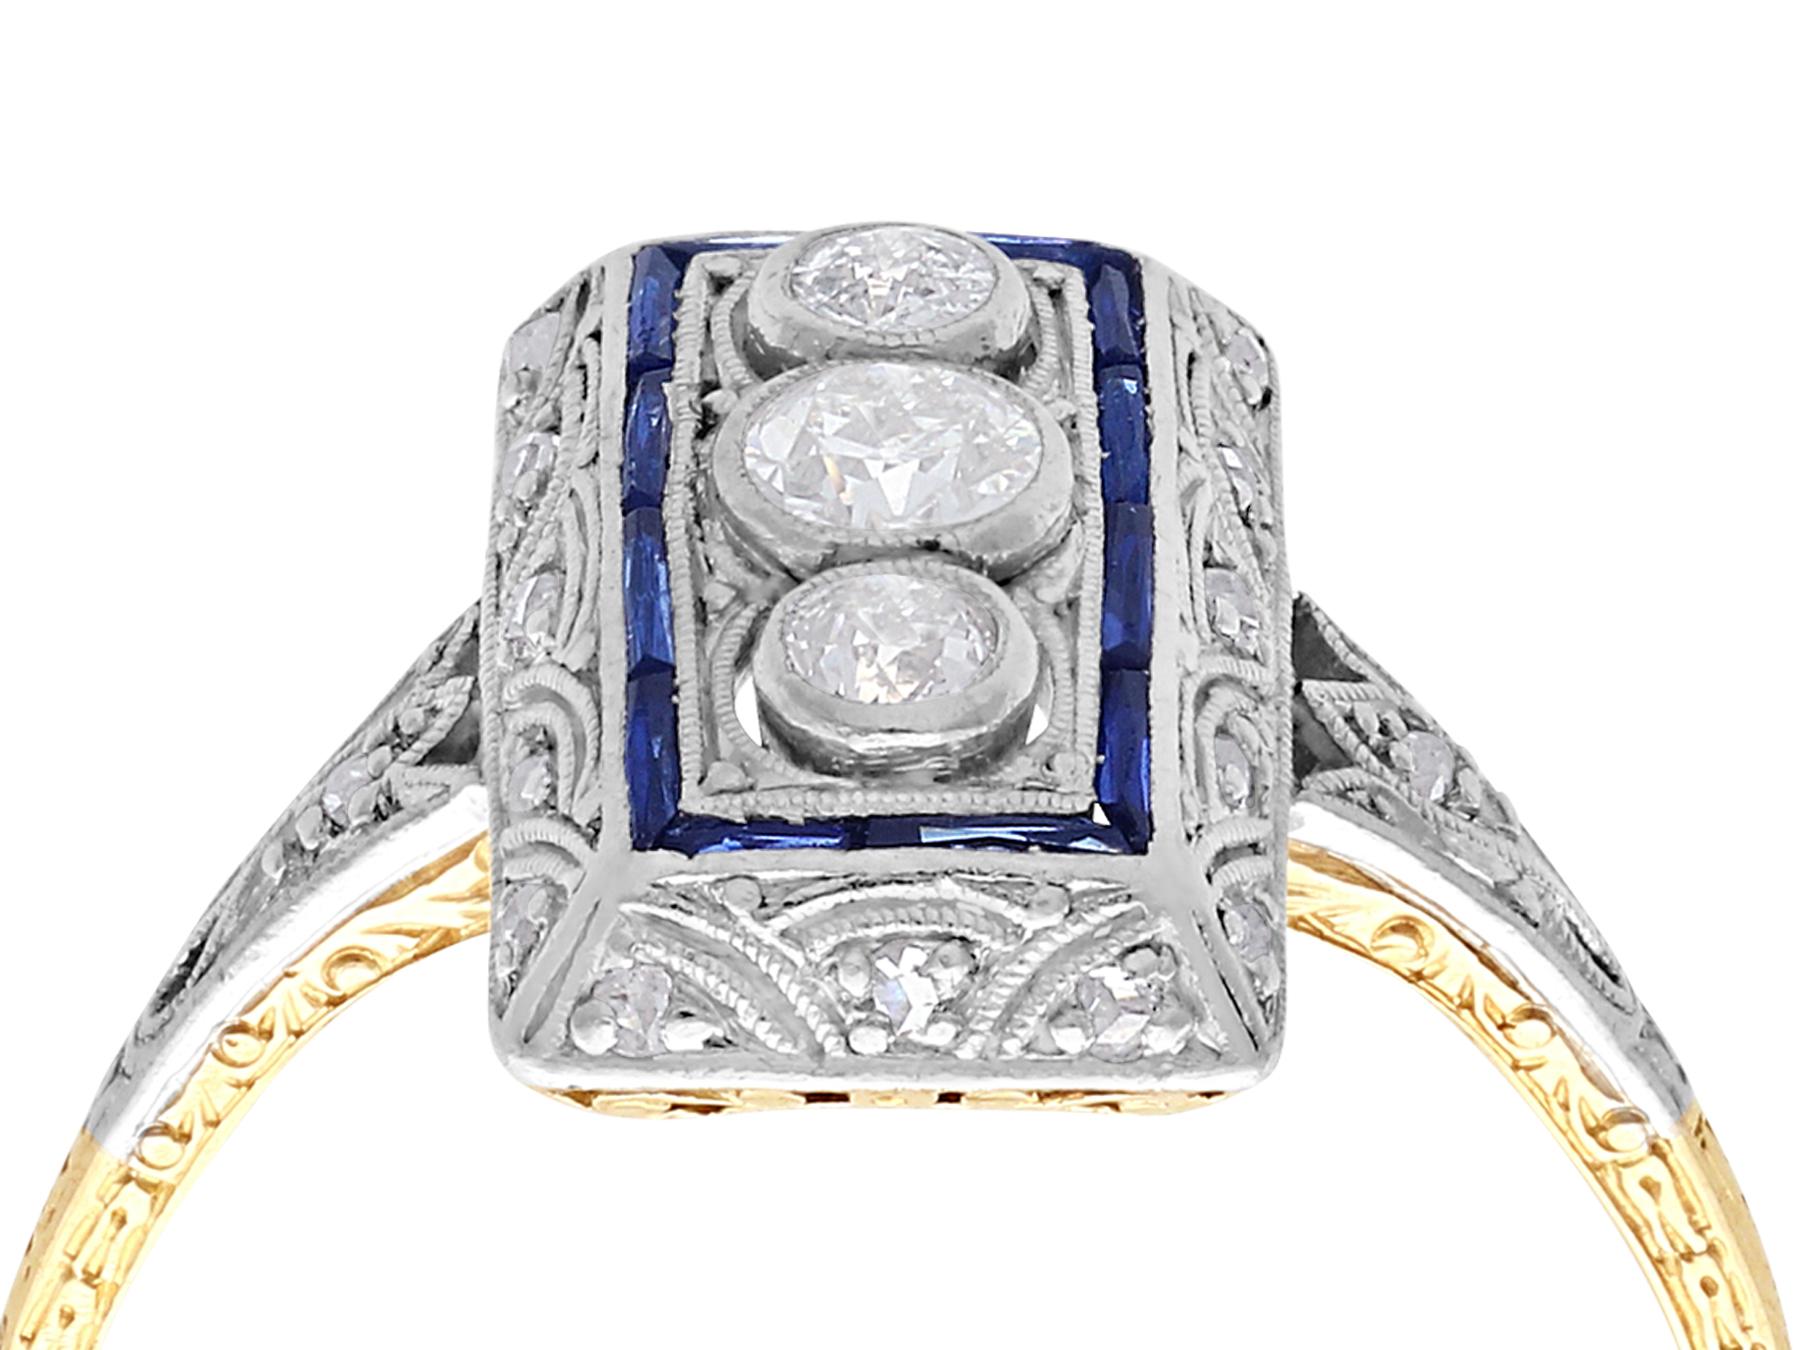 An impressive antique Art Deco 0.37 carat diamond, 0.16 carat sapphire and 14 karat gold cocktail ring; part of our diverse antique jewelry collections.

This fine and impressive 1920s Art Deco diamond and sapphire ring has been crafted in 14 k